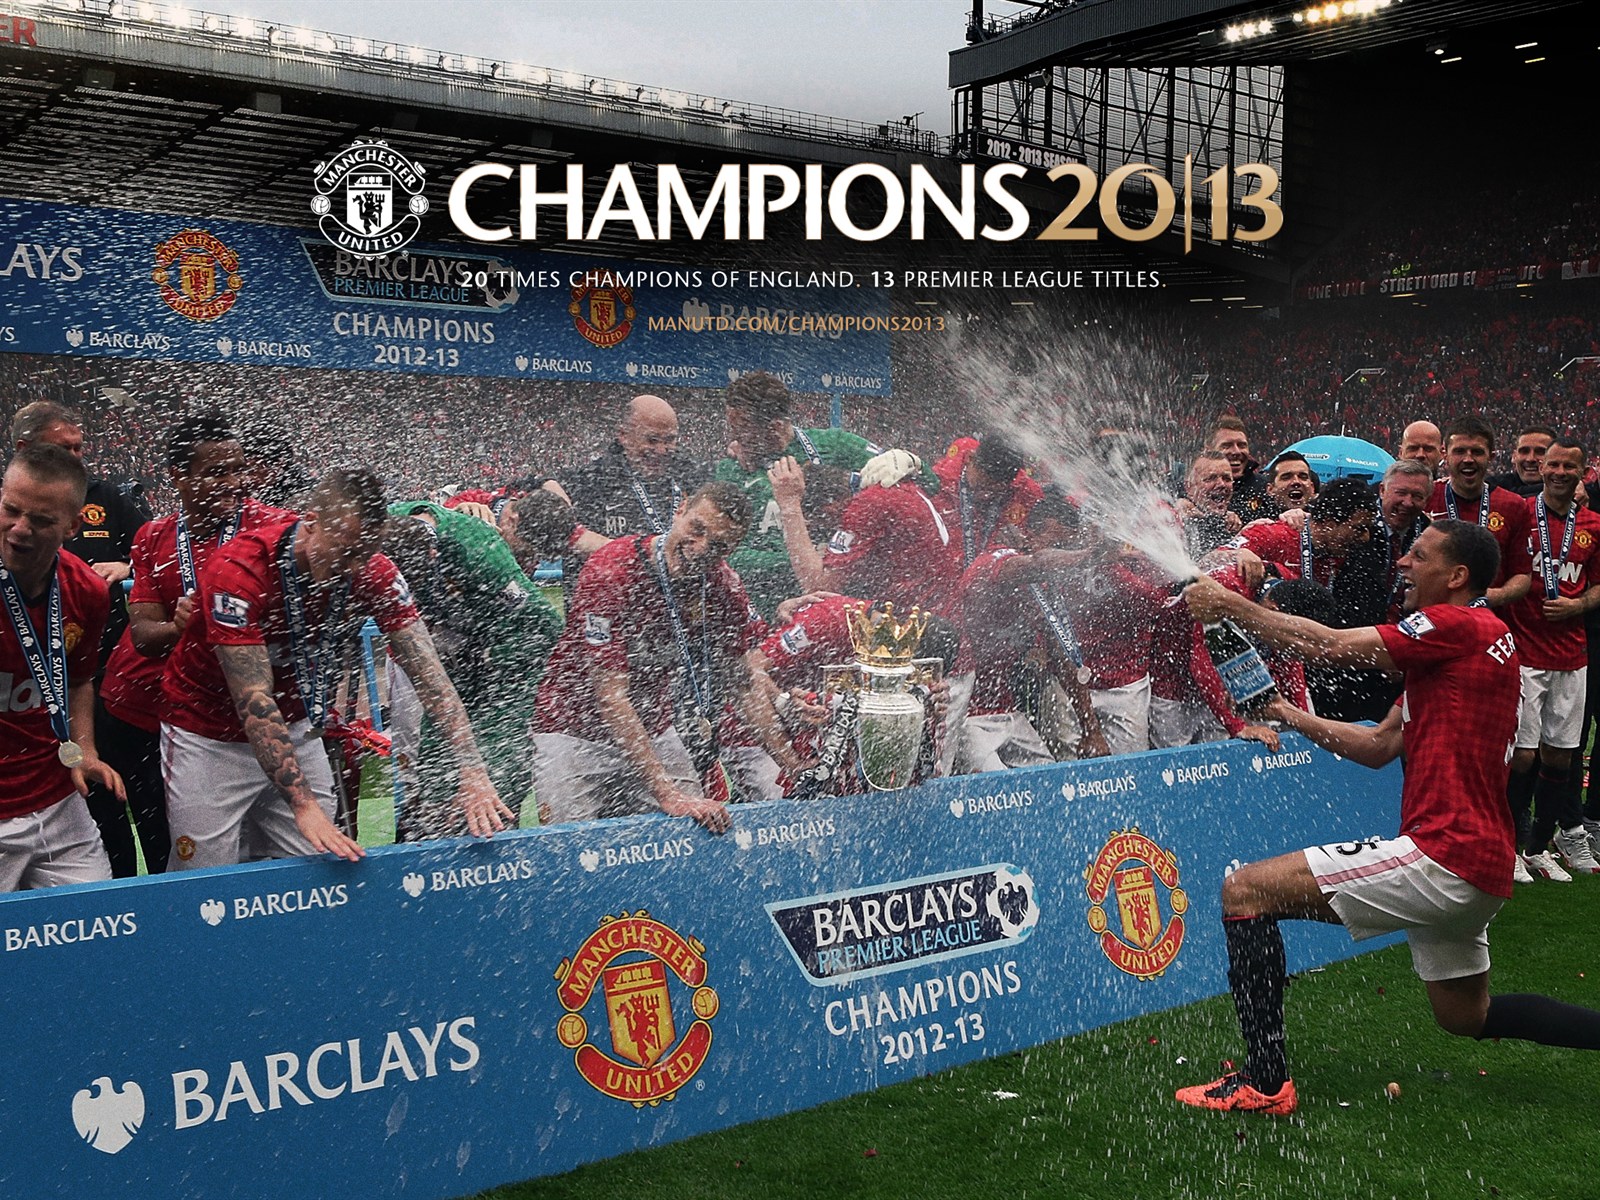 Manchester united 20 Times champions of england celebration wallpaper